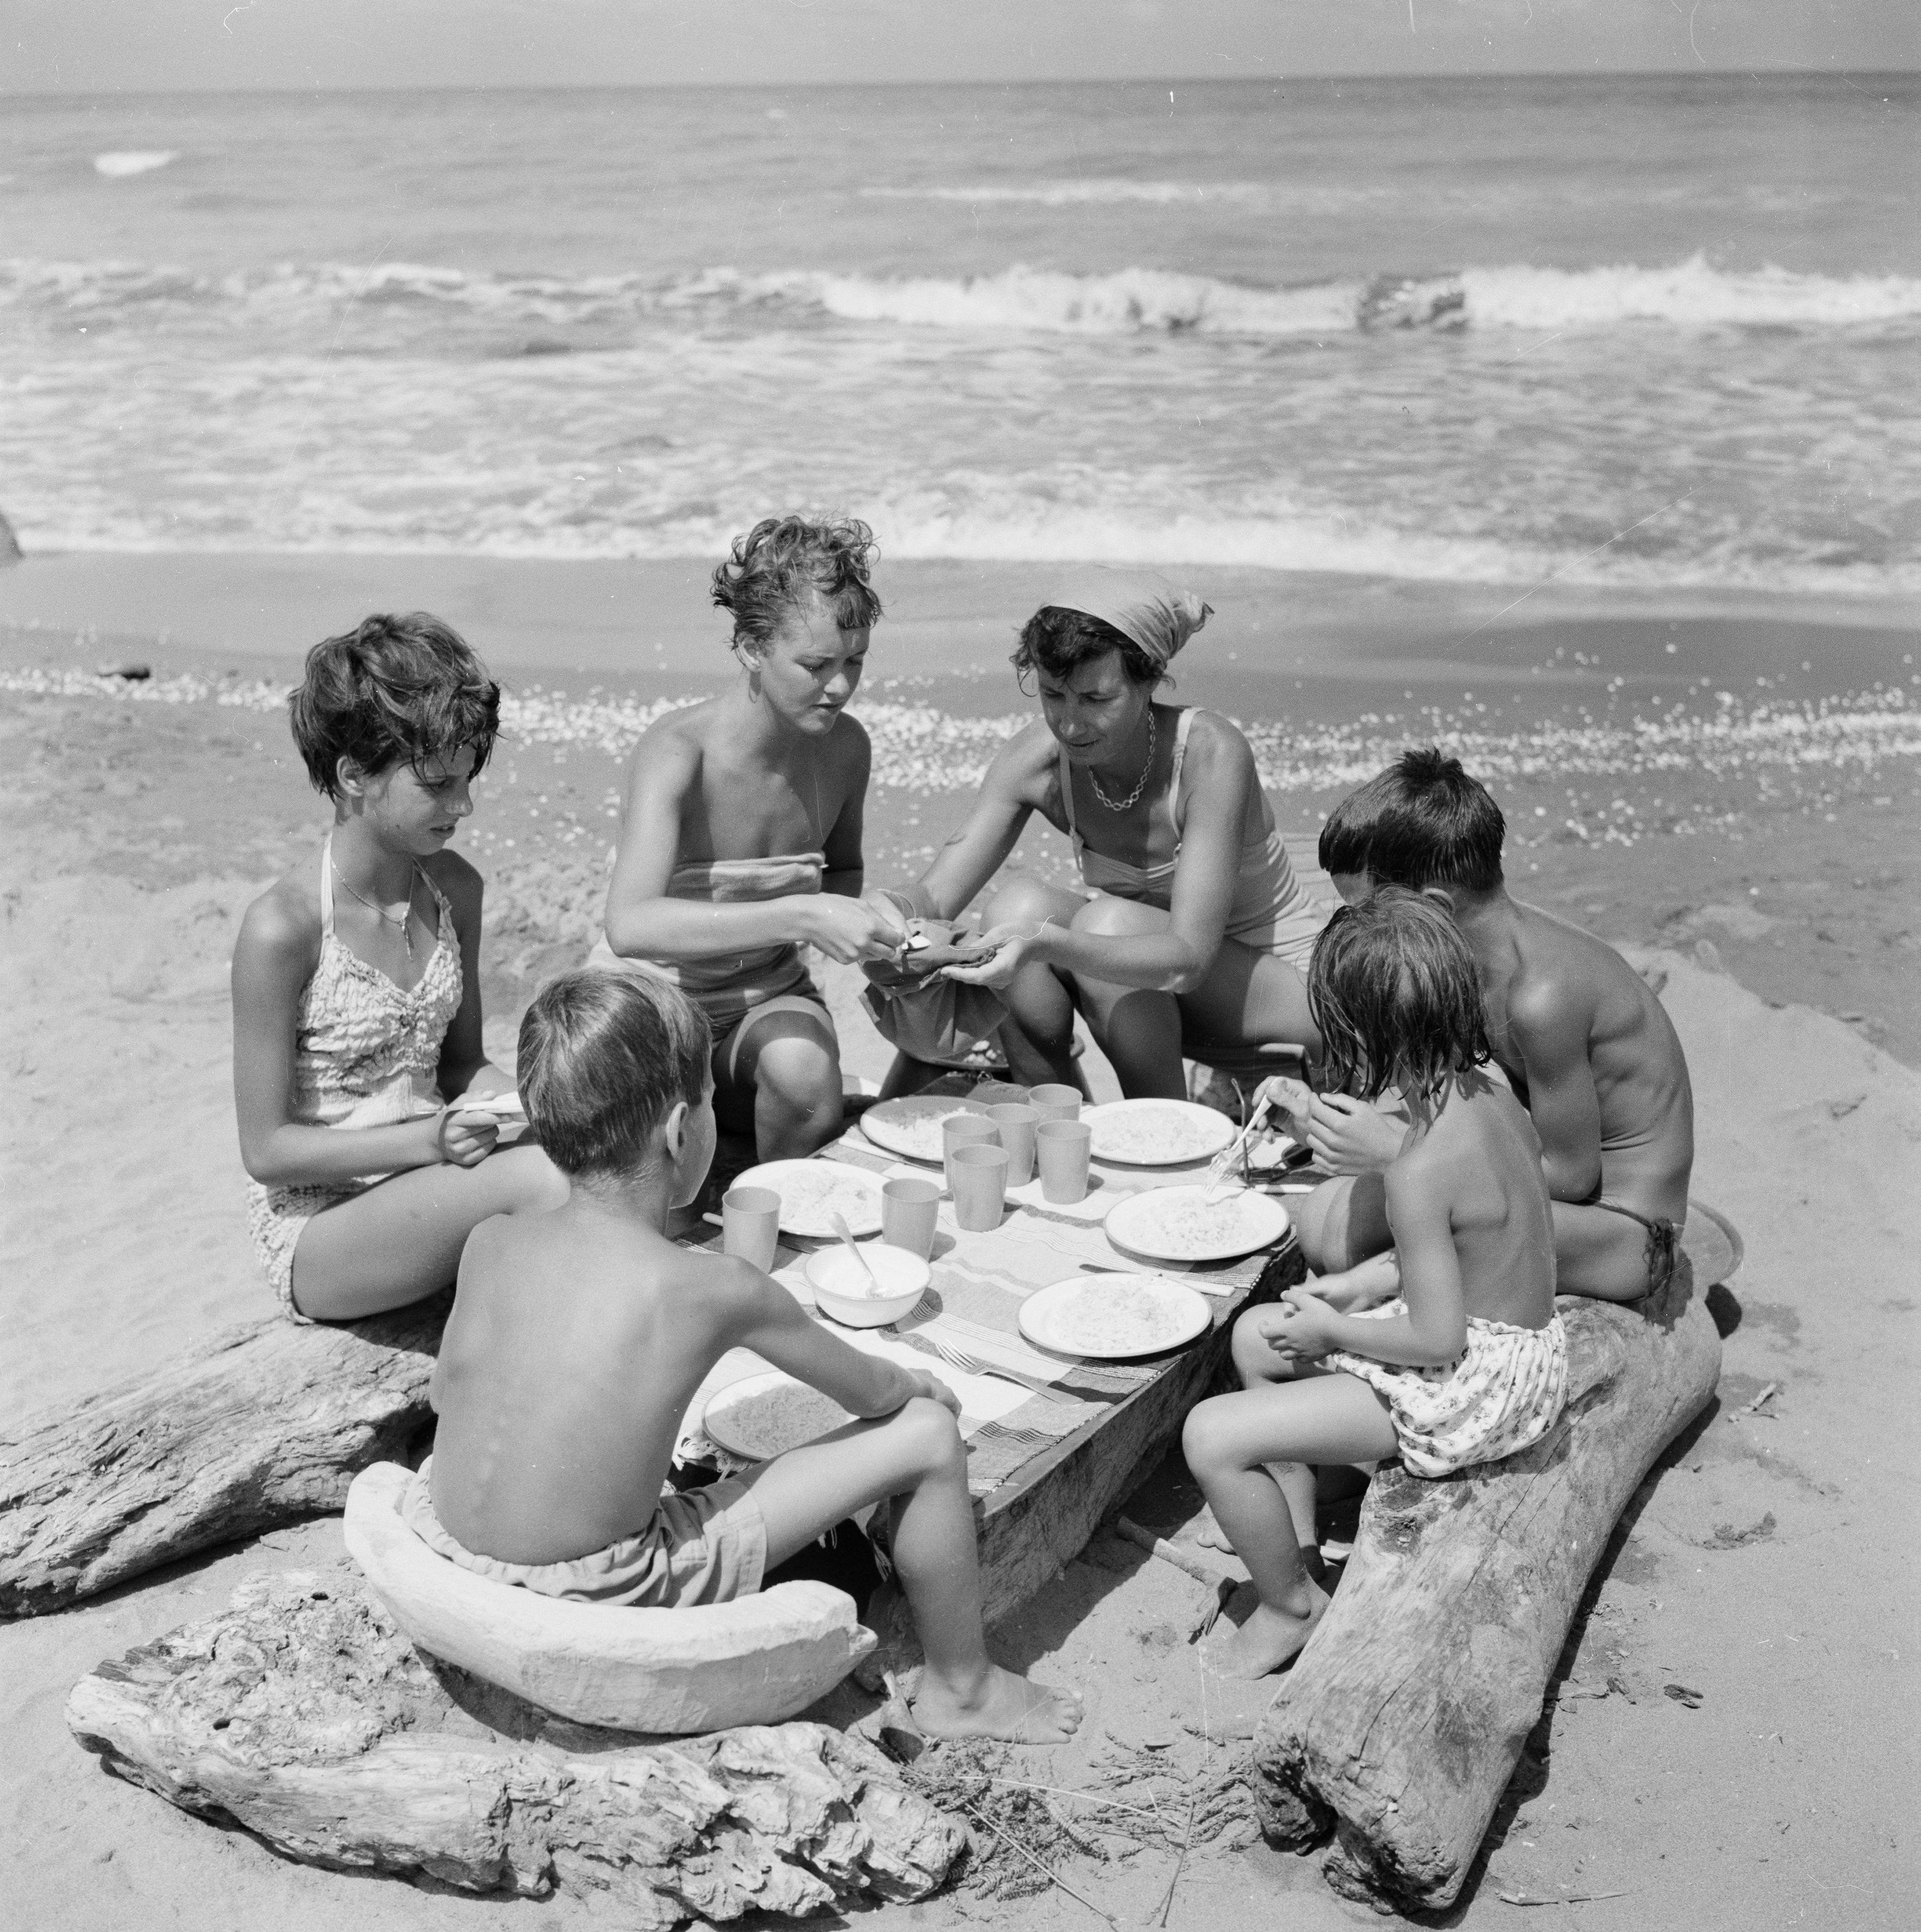 manuela darling family picnic in the Caspian sea. Her story as a food and travel writer 